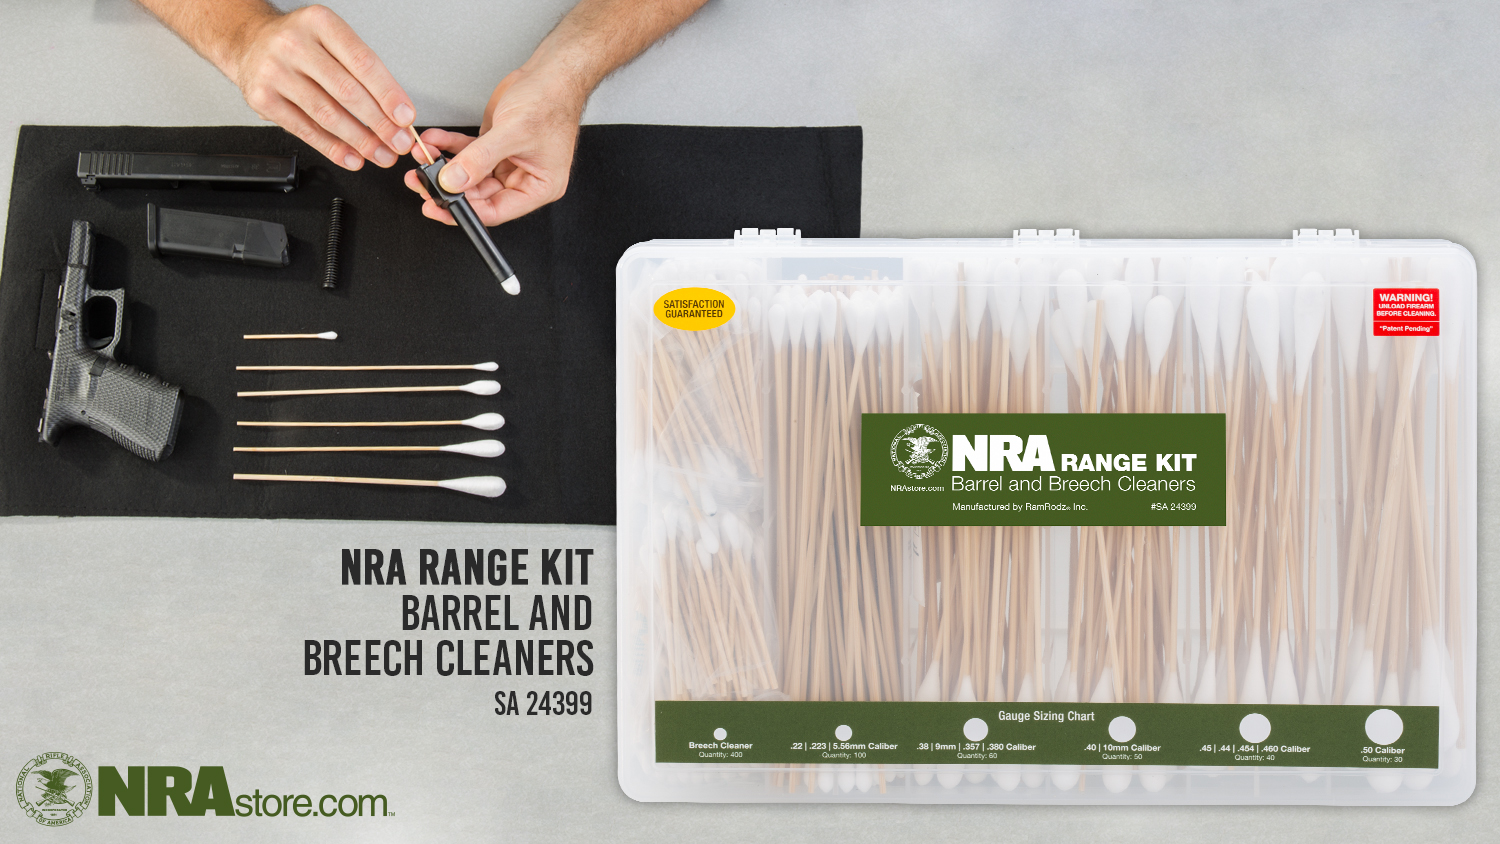 Be Ready For Hunting Season With The New NRA Range Kit